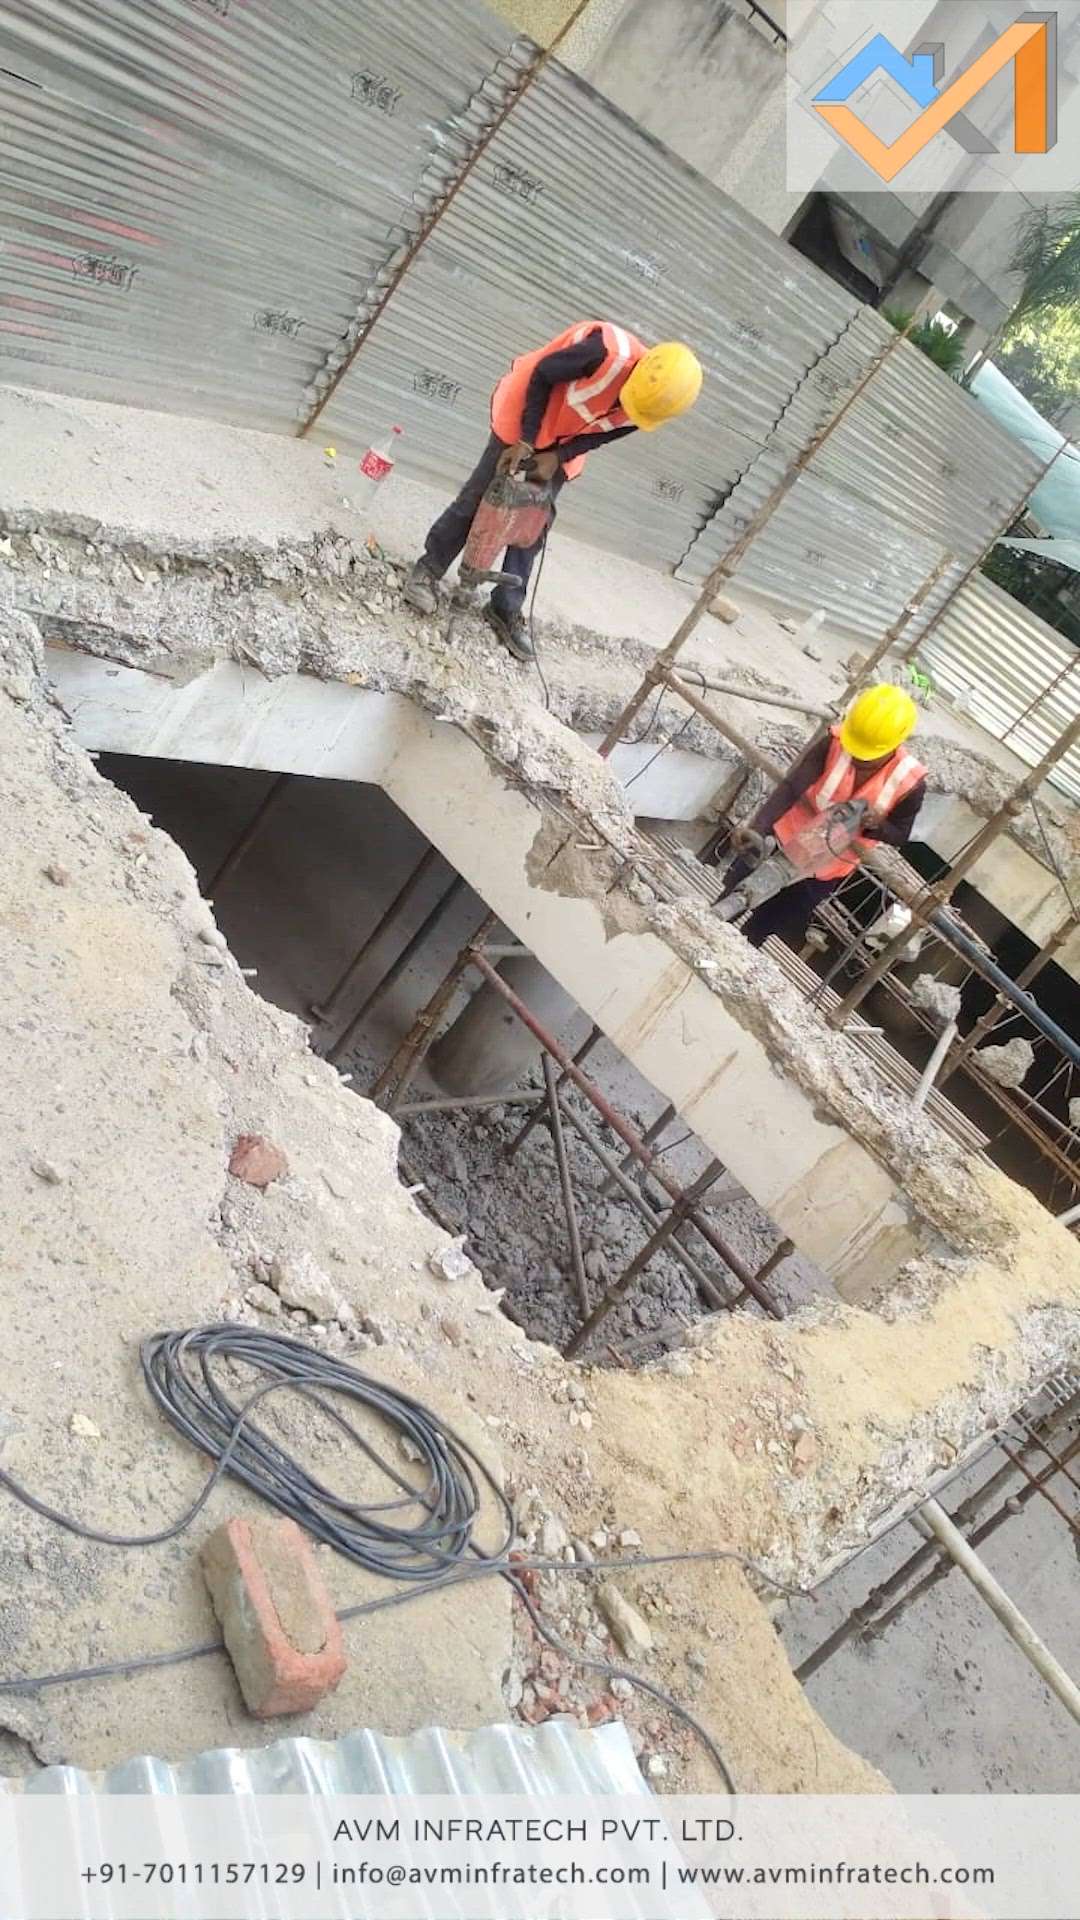 Retrofitting of beams, columns and slabs.


Follow us for more such amazing updates. 
.
.
#retrofitting #strengthening #civilengineering #avminfratech #rehabilitation  #civil #civilengineer #civilconstruction #construction #constructionlife #constructionsite #site #sitework #sitevisit #consultant #consultancy